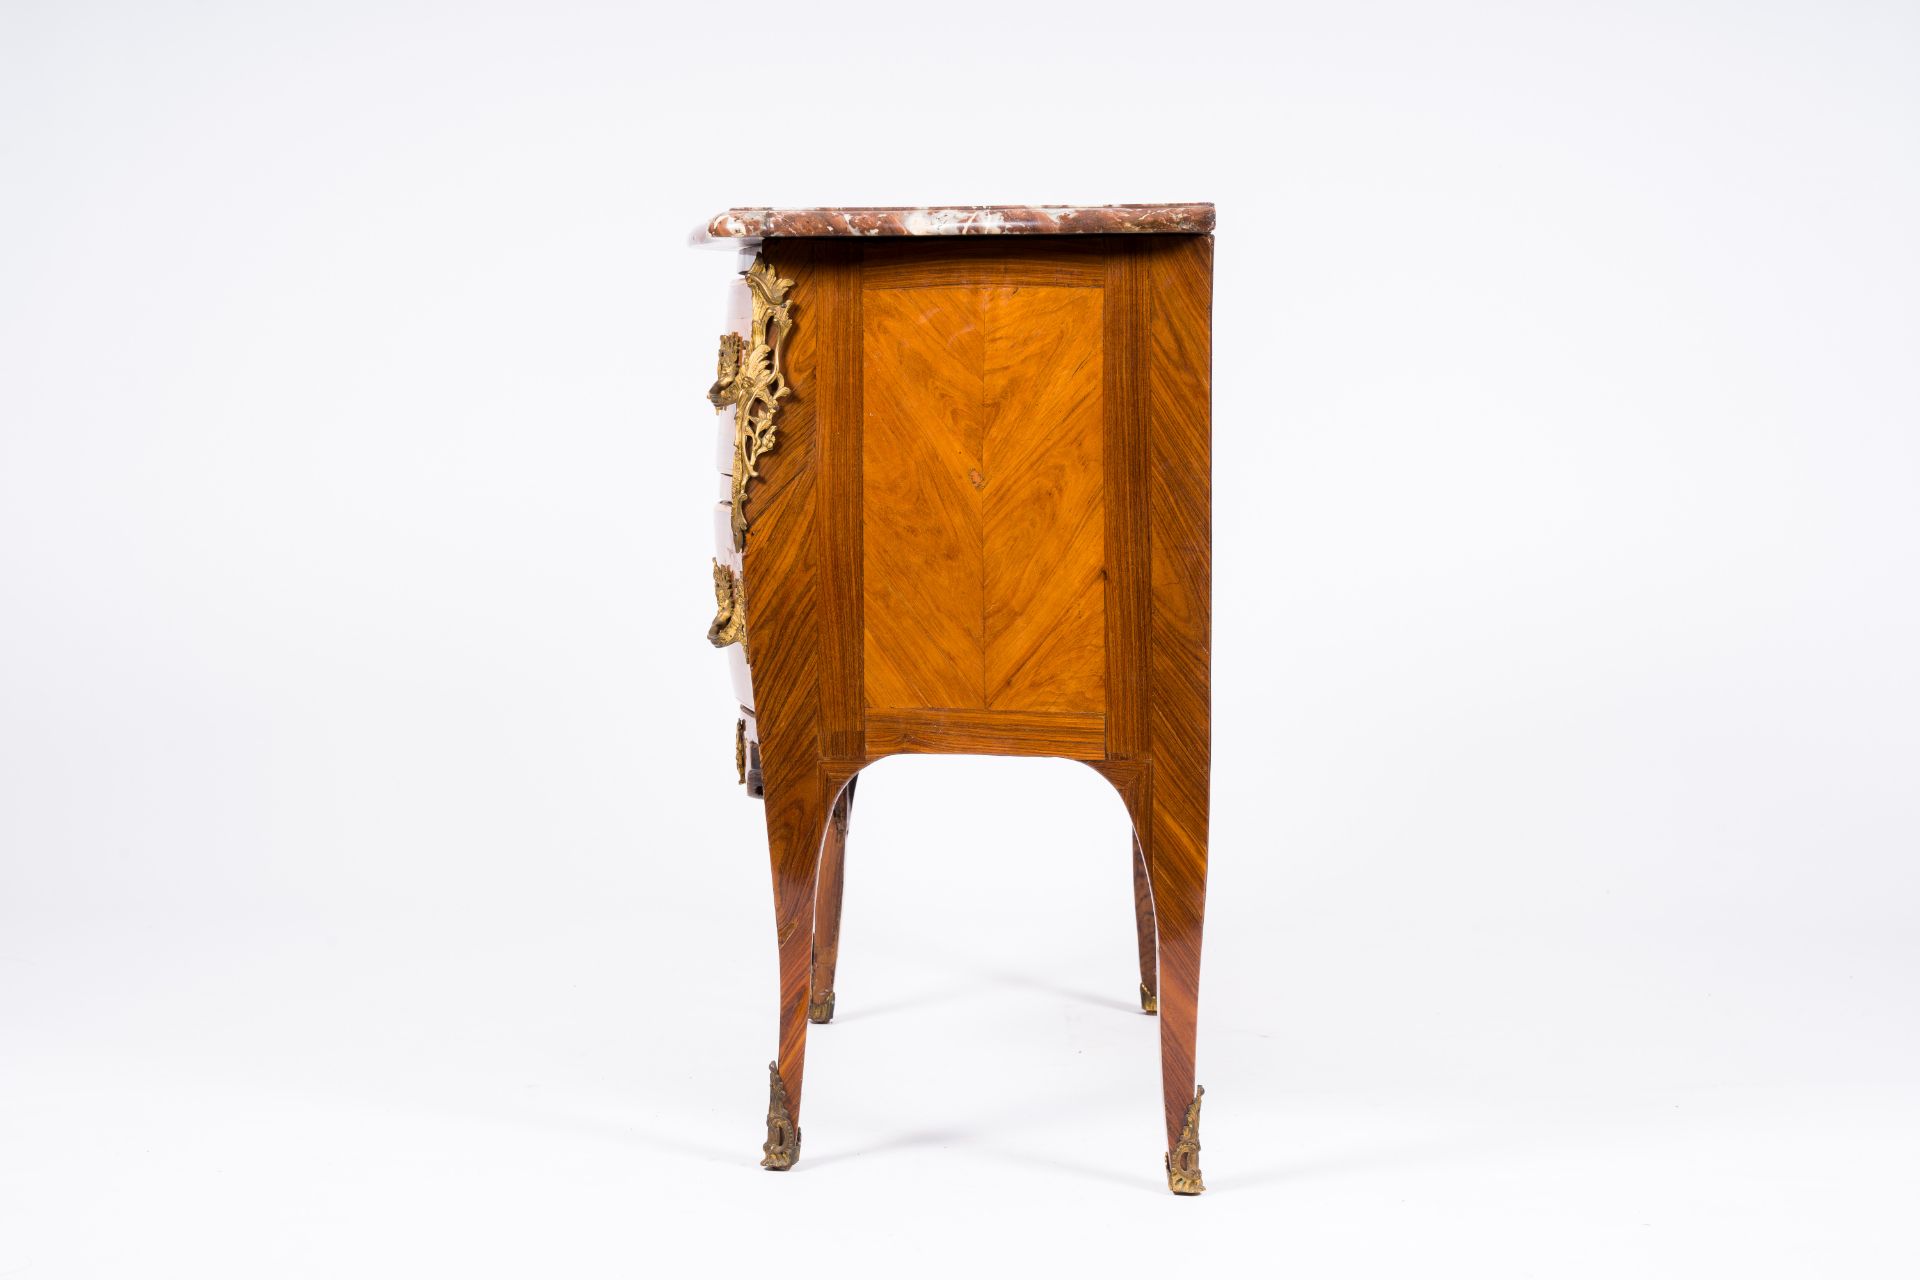 A French Louis XV style bronze mounted veneered wood chest of drawers with marble top, 18th C. - Image 3 of 6